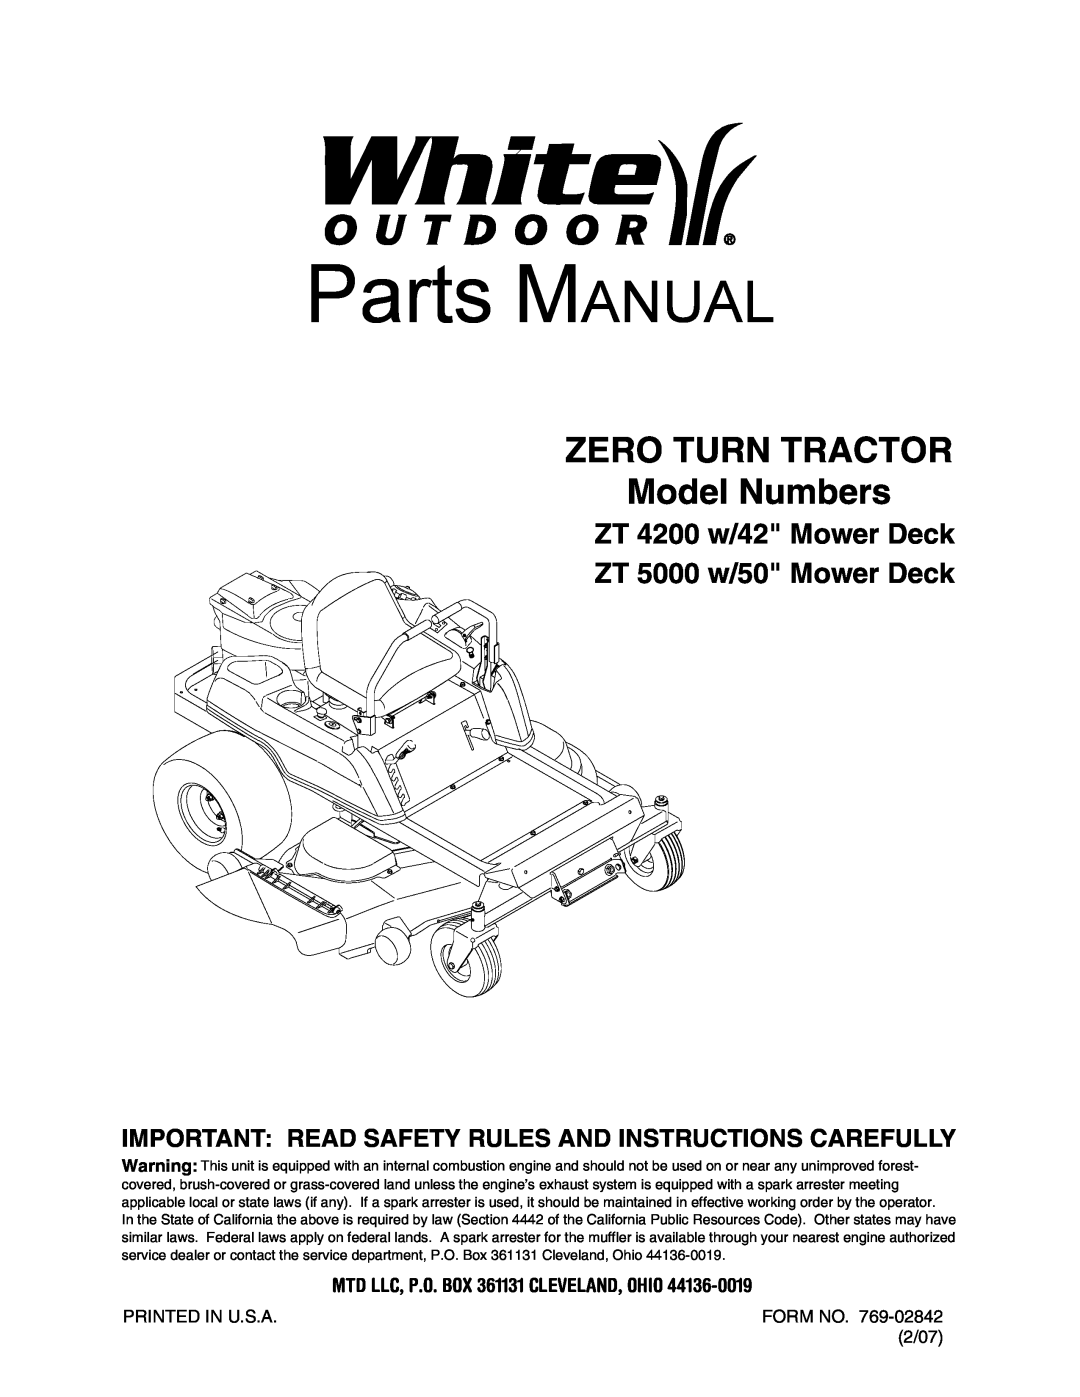 White Outdoor ZT 5000, ZT 4200 manual Form No, 2/07, Parts MANUAL, ZERO TURN TRACTOR Model Numbers 